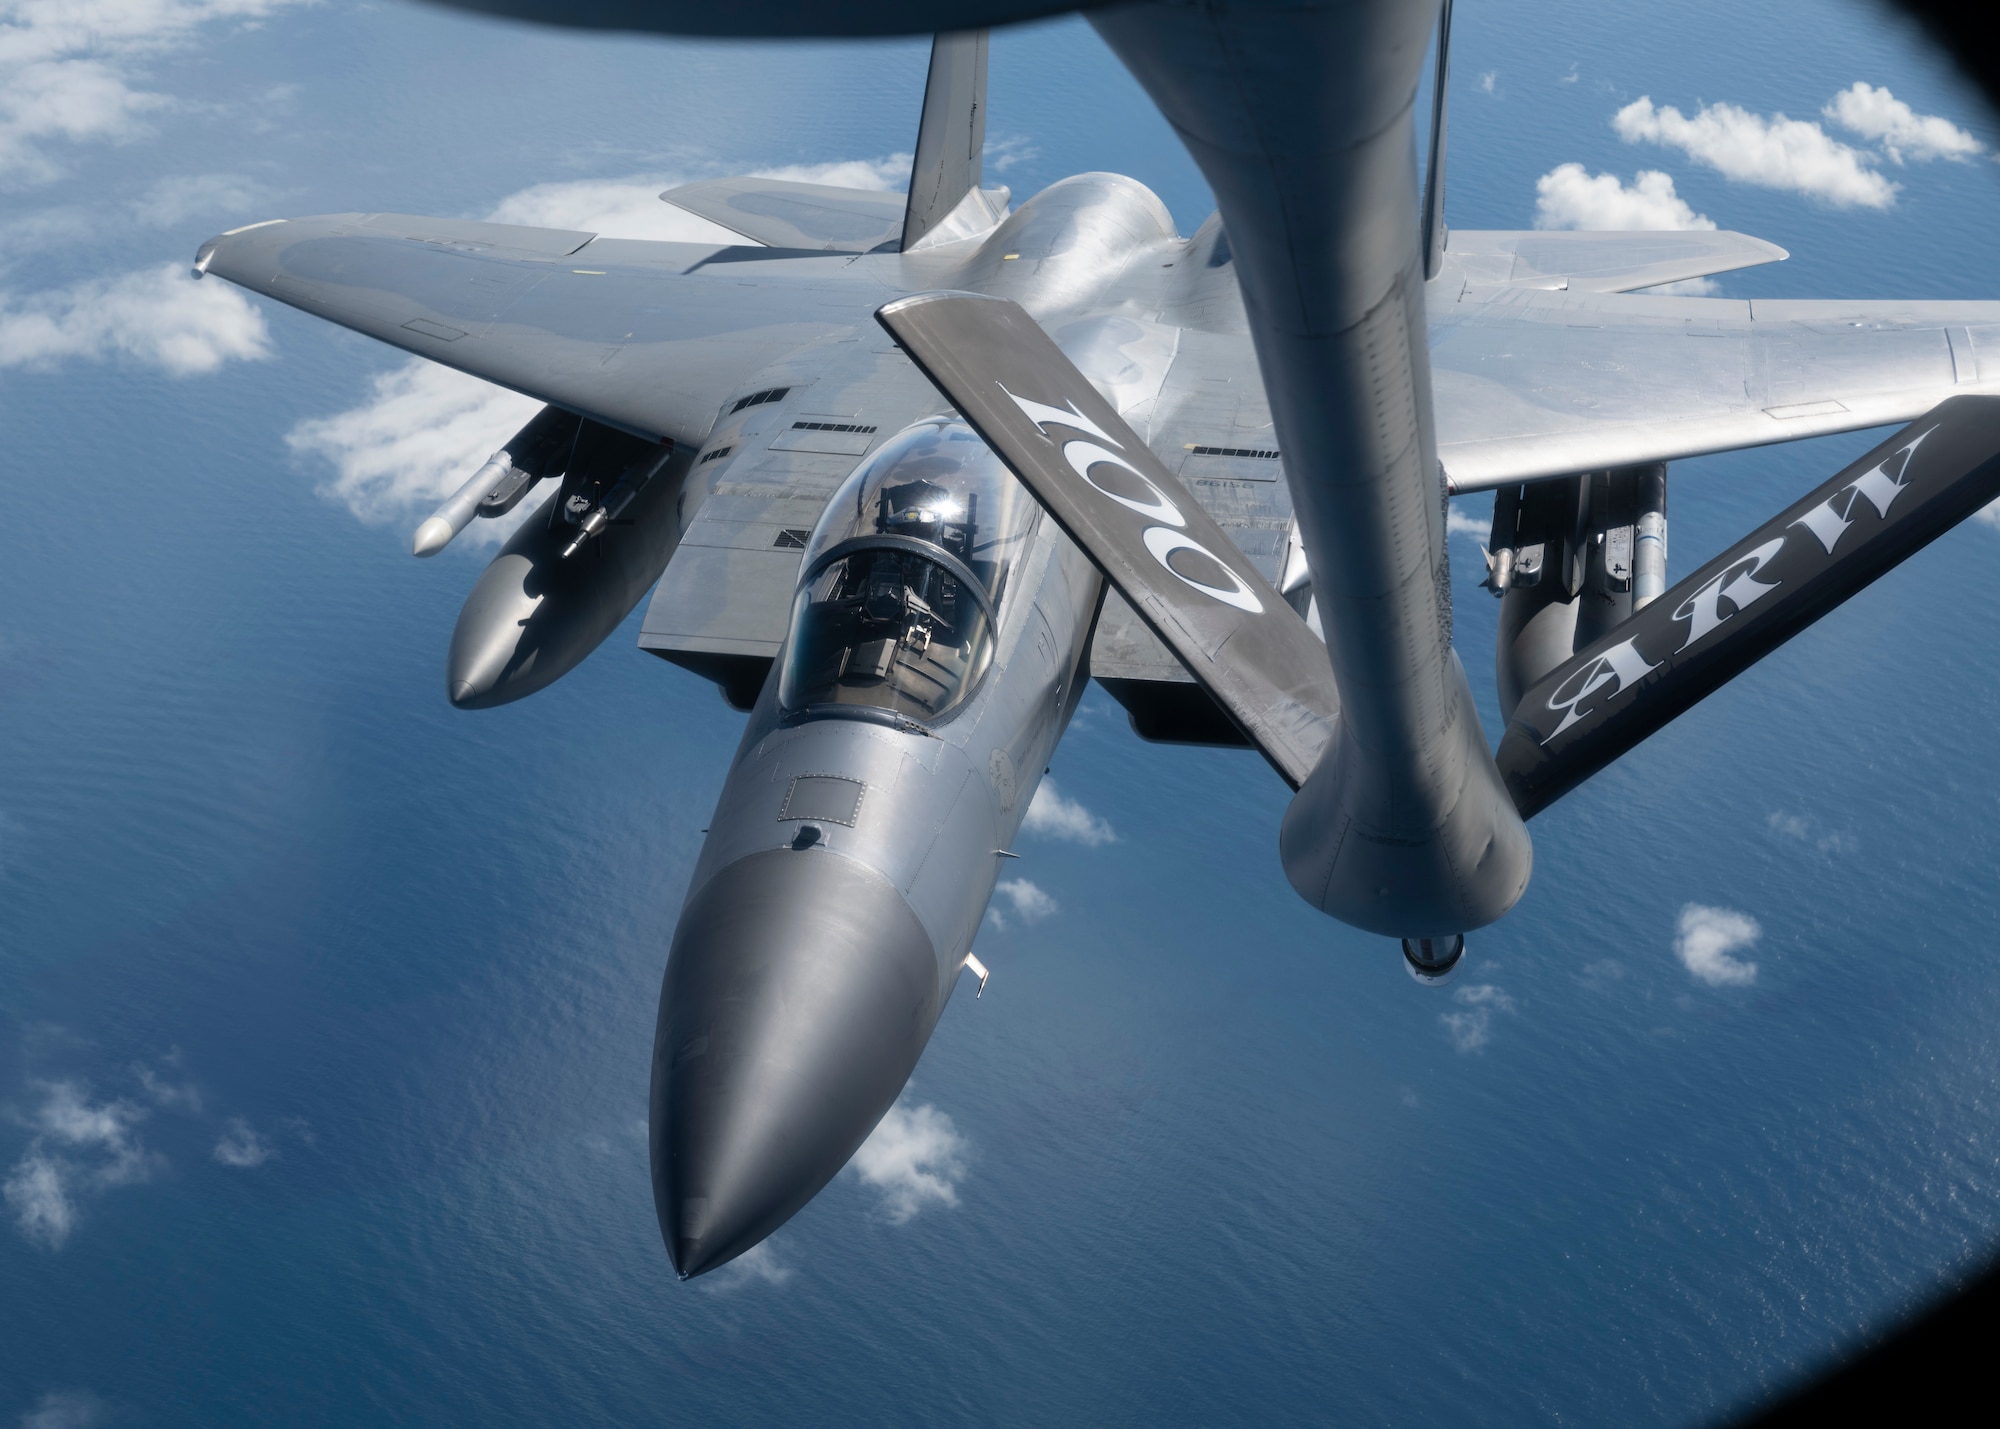 A U.S. Air Force F-15C Eagle aircraft assigned to the 48th Fighter Wing, Royal Air Force Lakenheath, England, prepares to receive fuel from a KC-135 Stratotanker aircraft assigned to the 100th Air Refueling Wing, RAF Mildenhall, England, during exercise High Life over the North Sea, Sept. 13, 2021.